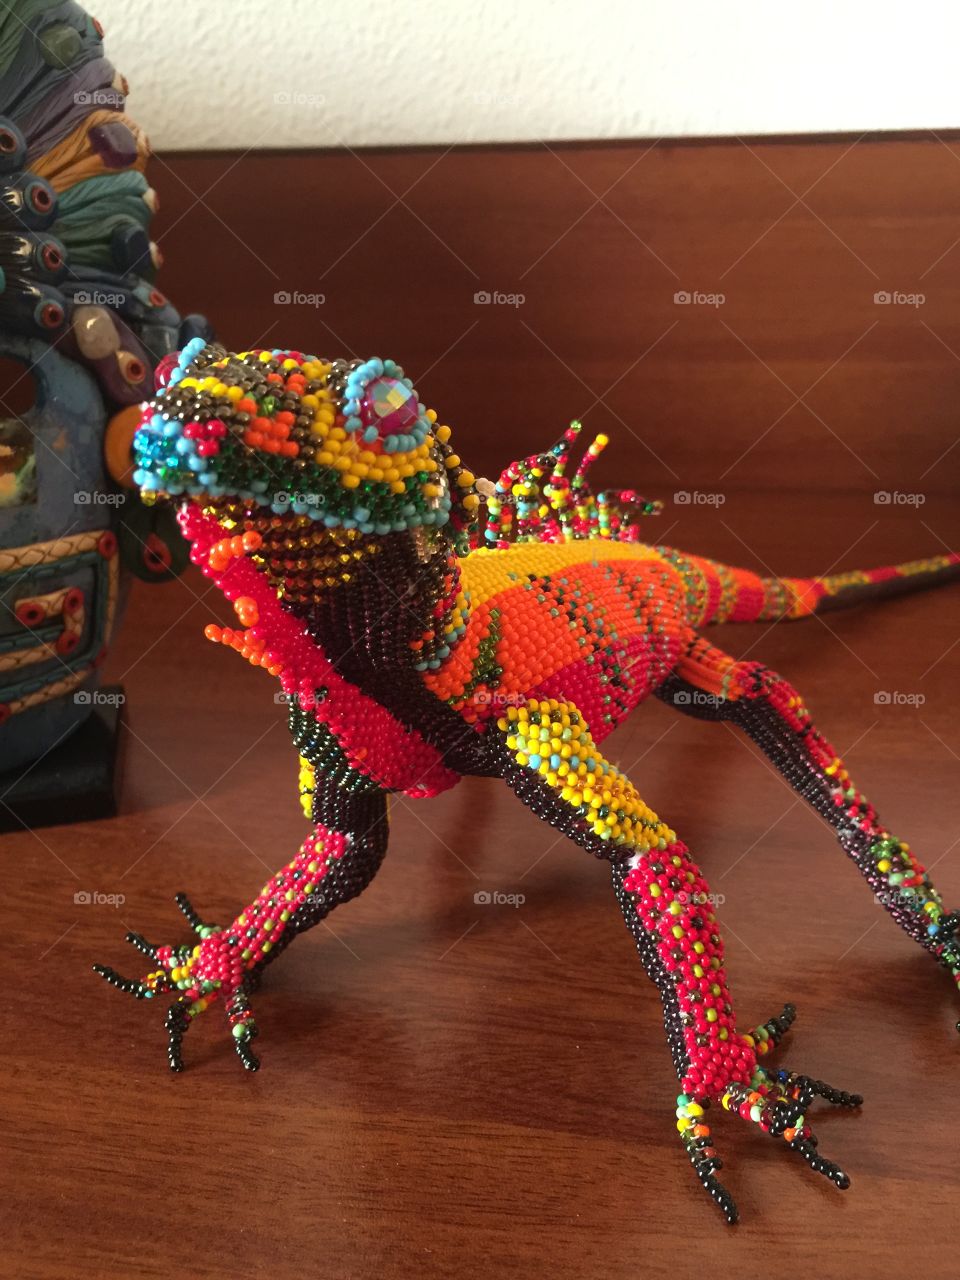 Iguana made from plastic beads from market in Antigua, Guatemala